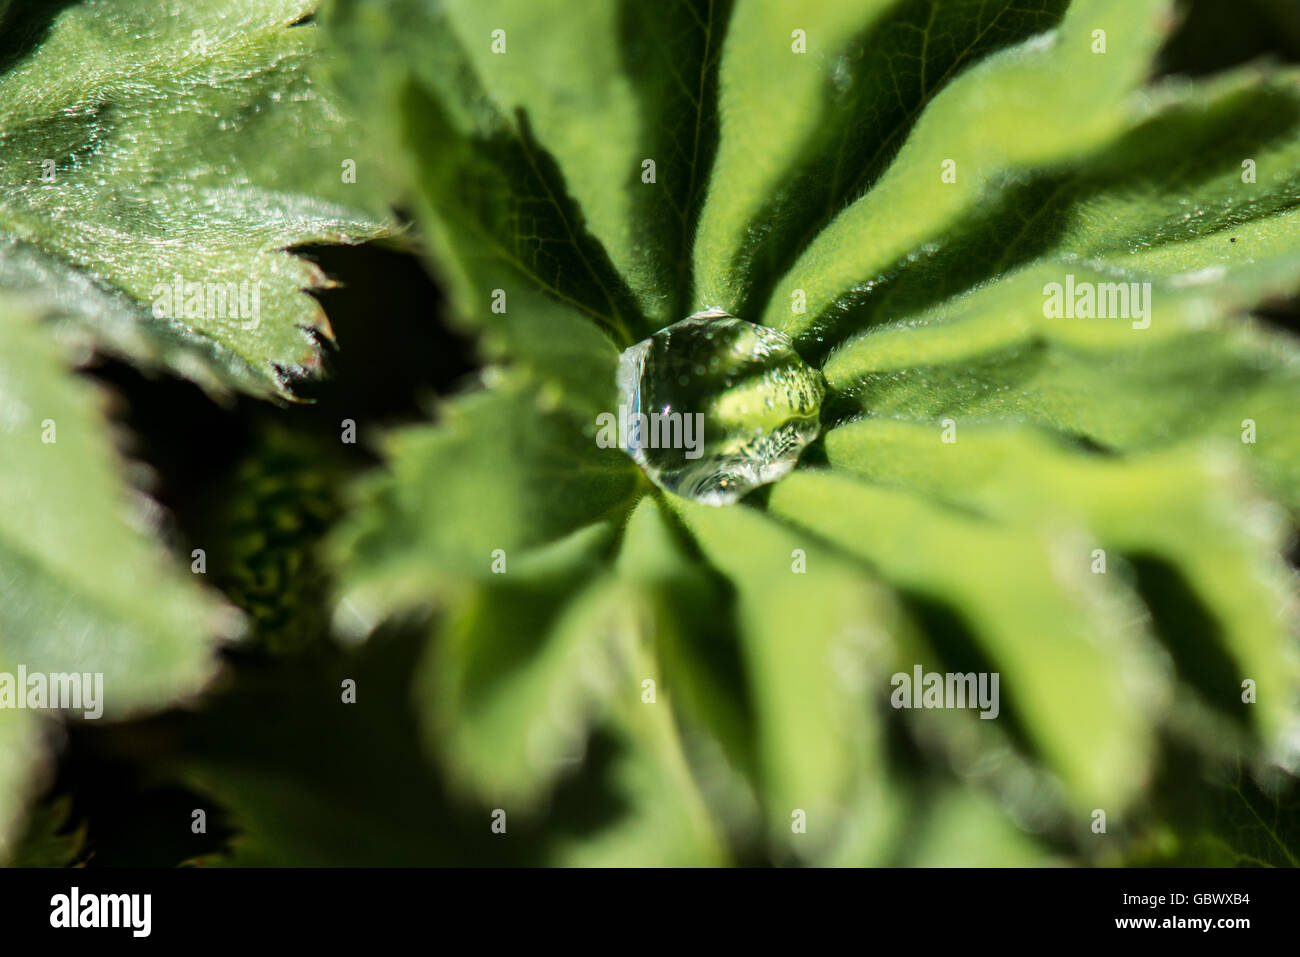 A close up of a water droplet on the leaf of a Lady's mantle (Alchemilla mollis) Stock Photo